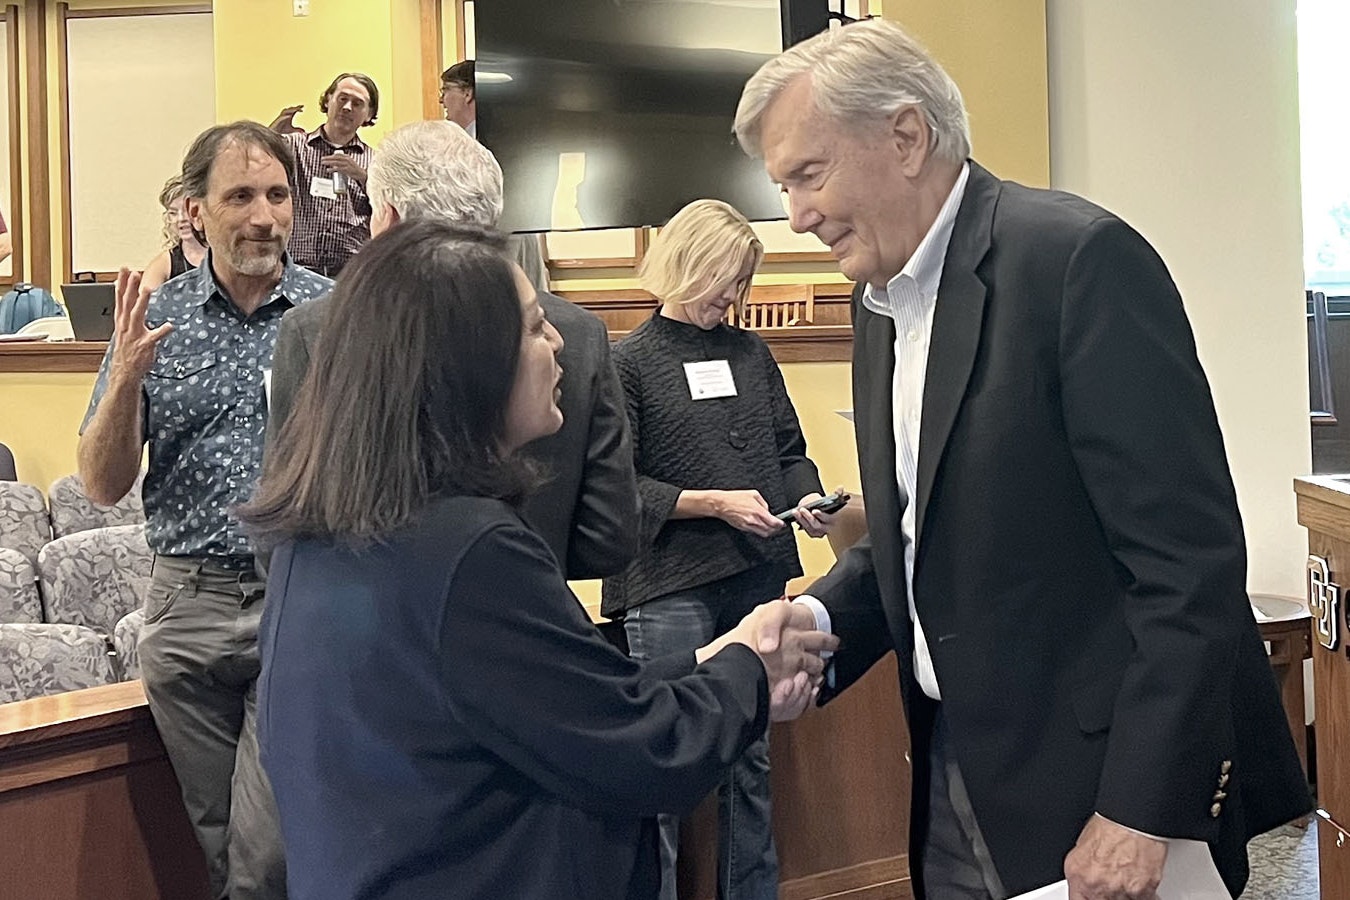 Former U.S. Interior Secretary and Arizona Governor Bruce Babbitt meets with Nora McDowell, a representative of the Fort Mojave Indian Tribe on Friday during the “Crisis on the Colorado River” conference in Boulder, Colorado.